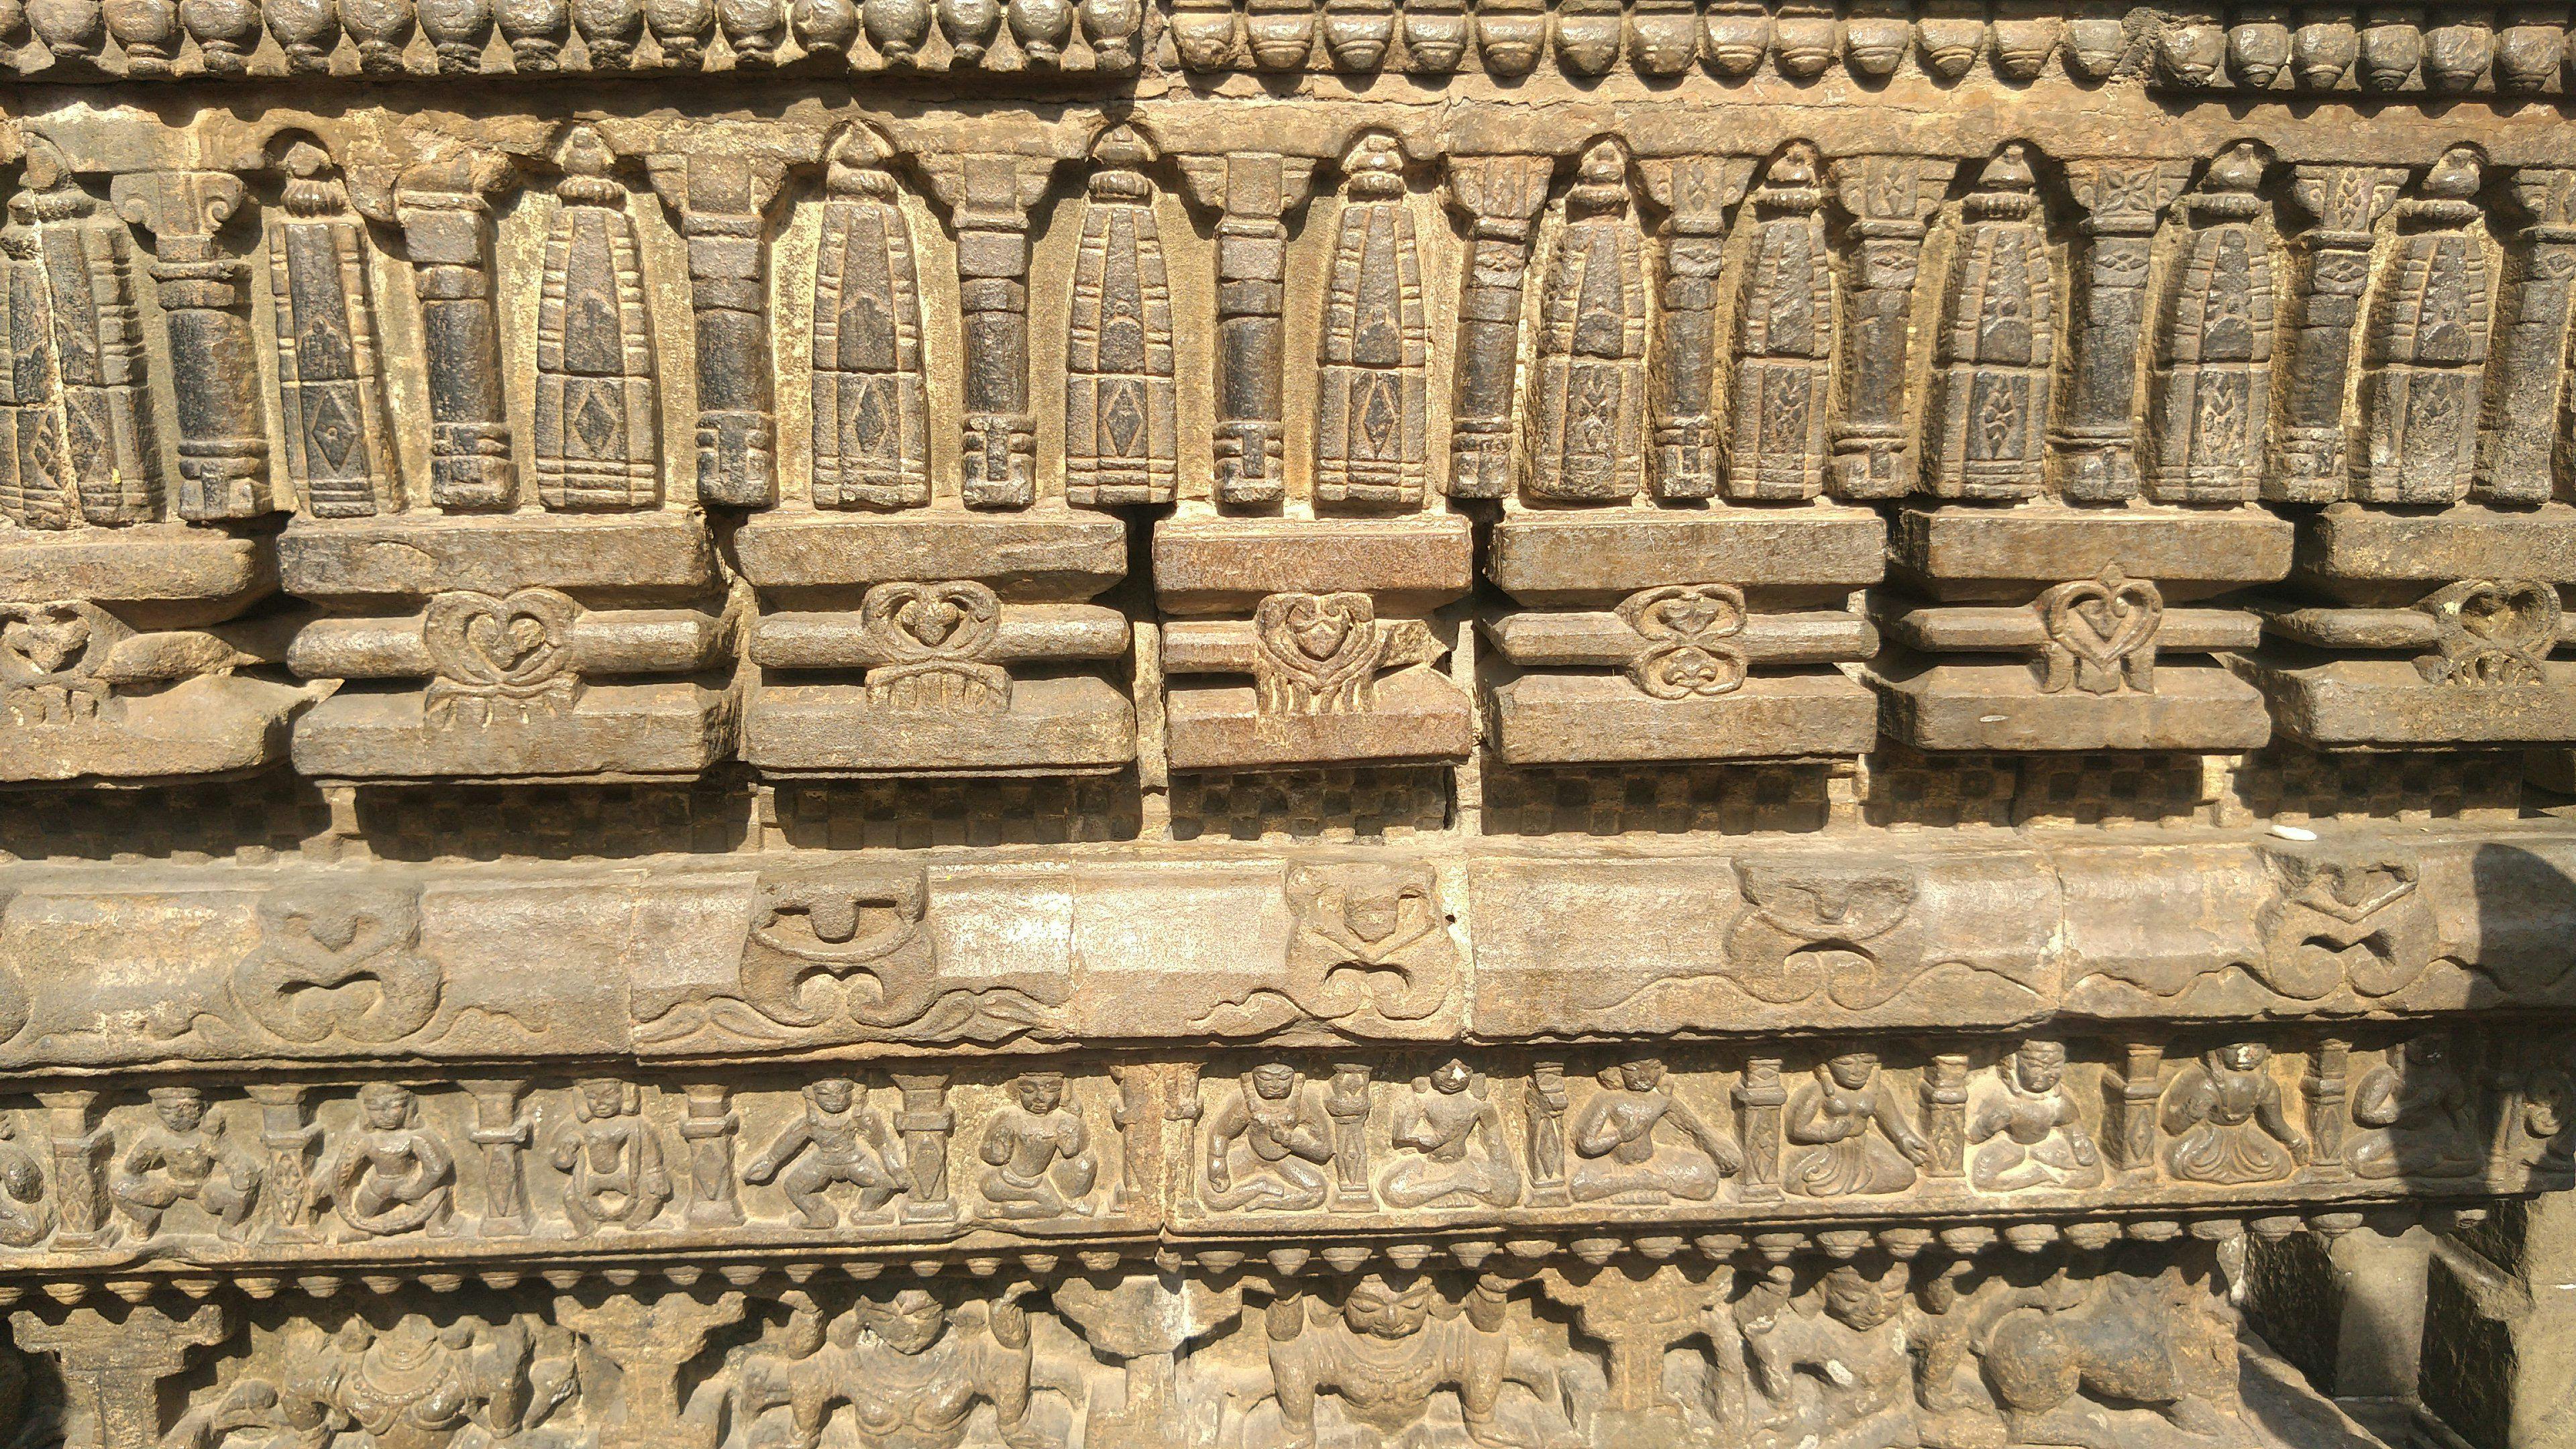 Carvings on the temple wall